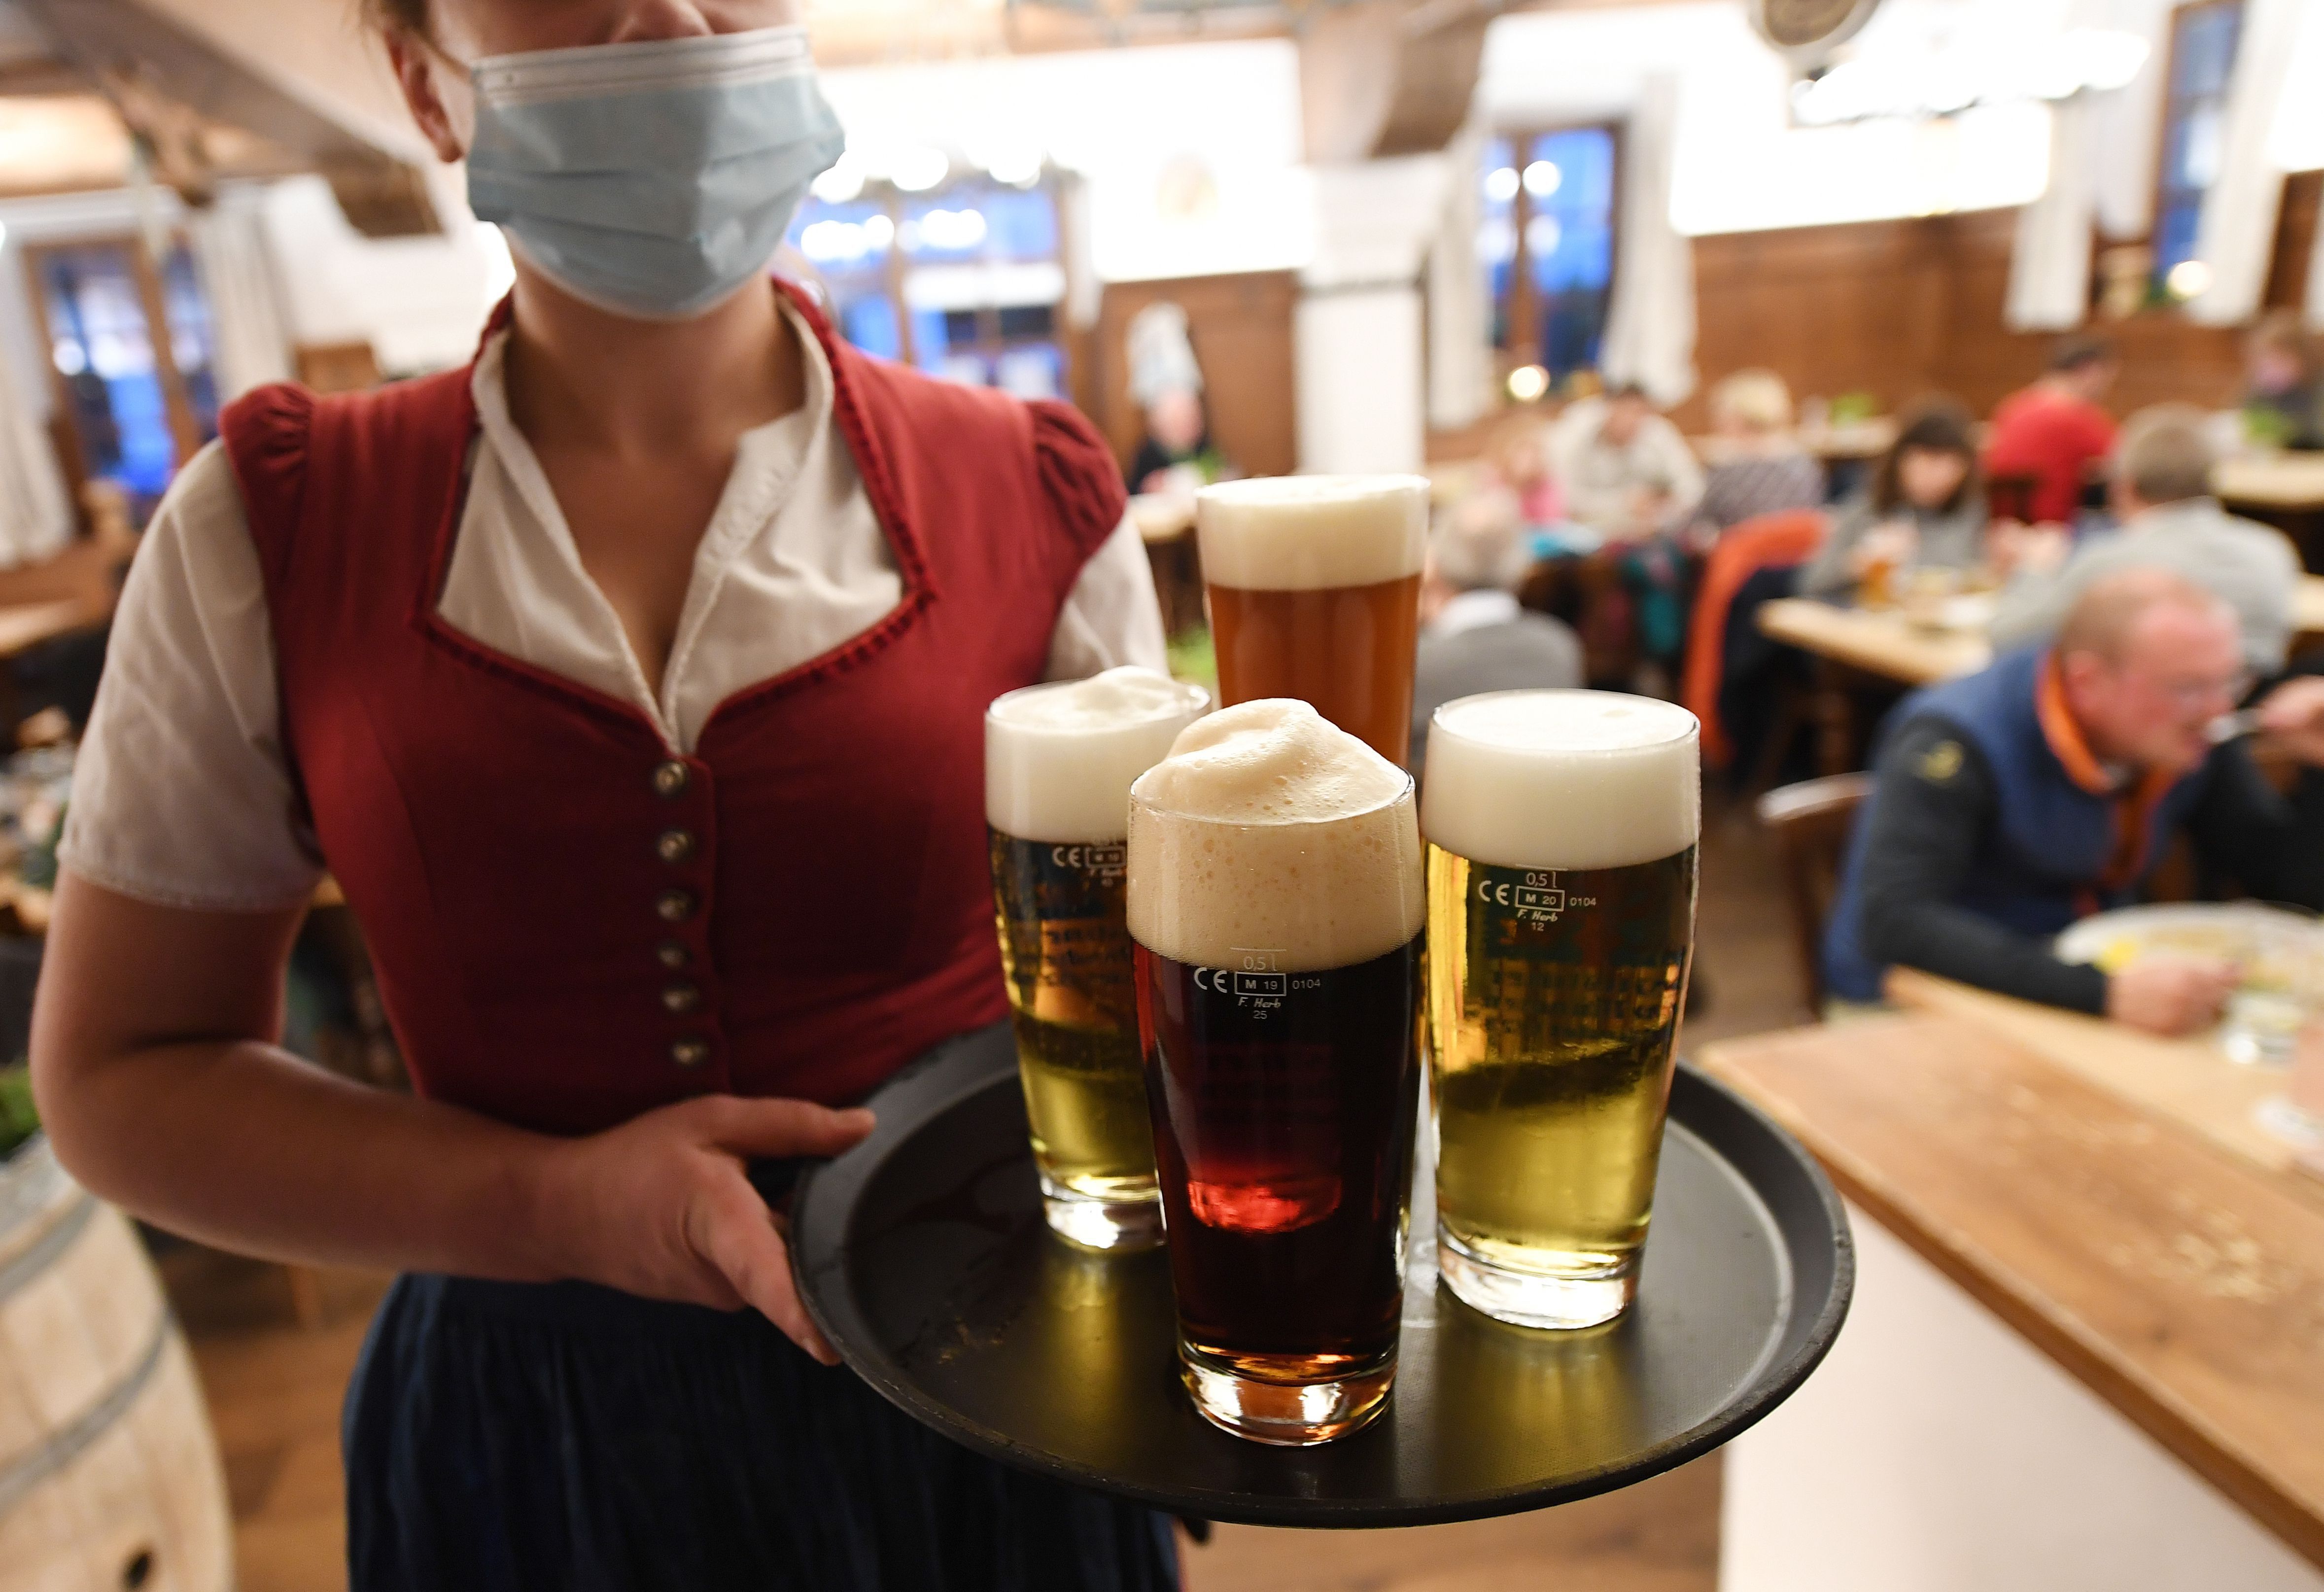 An inn in Bavaria on Oct. 17 amid covid restrictions